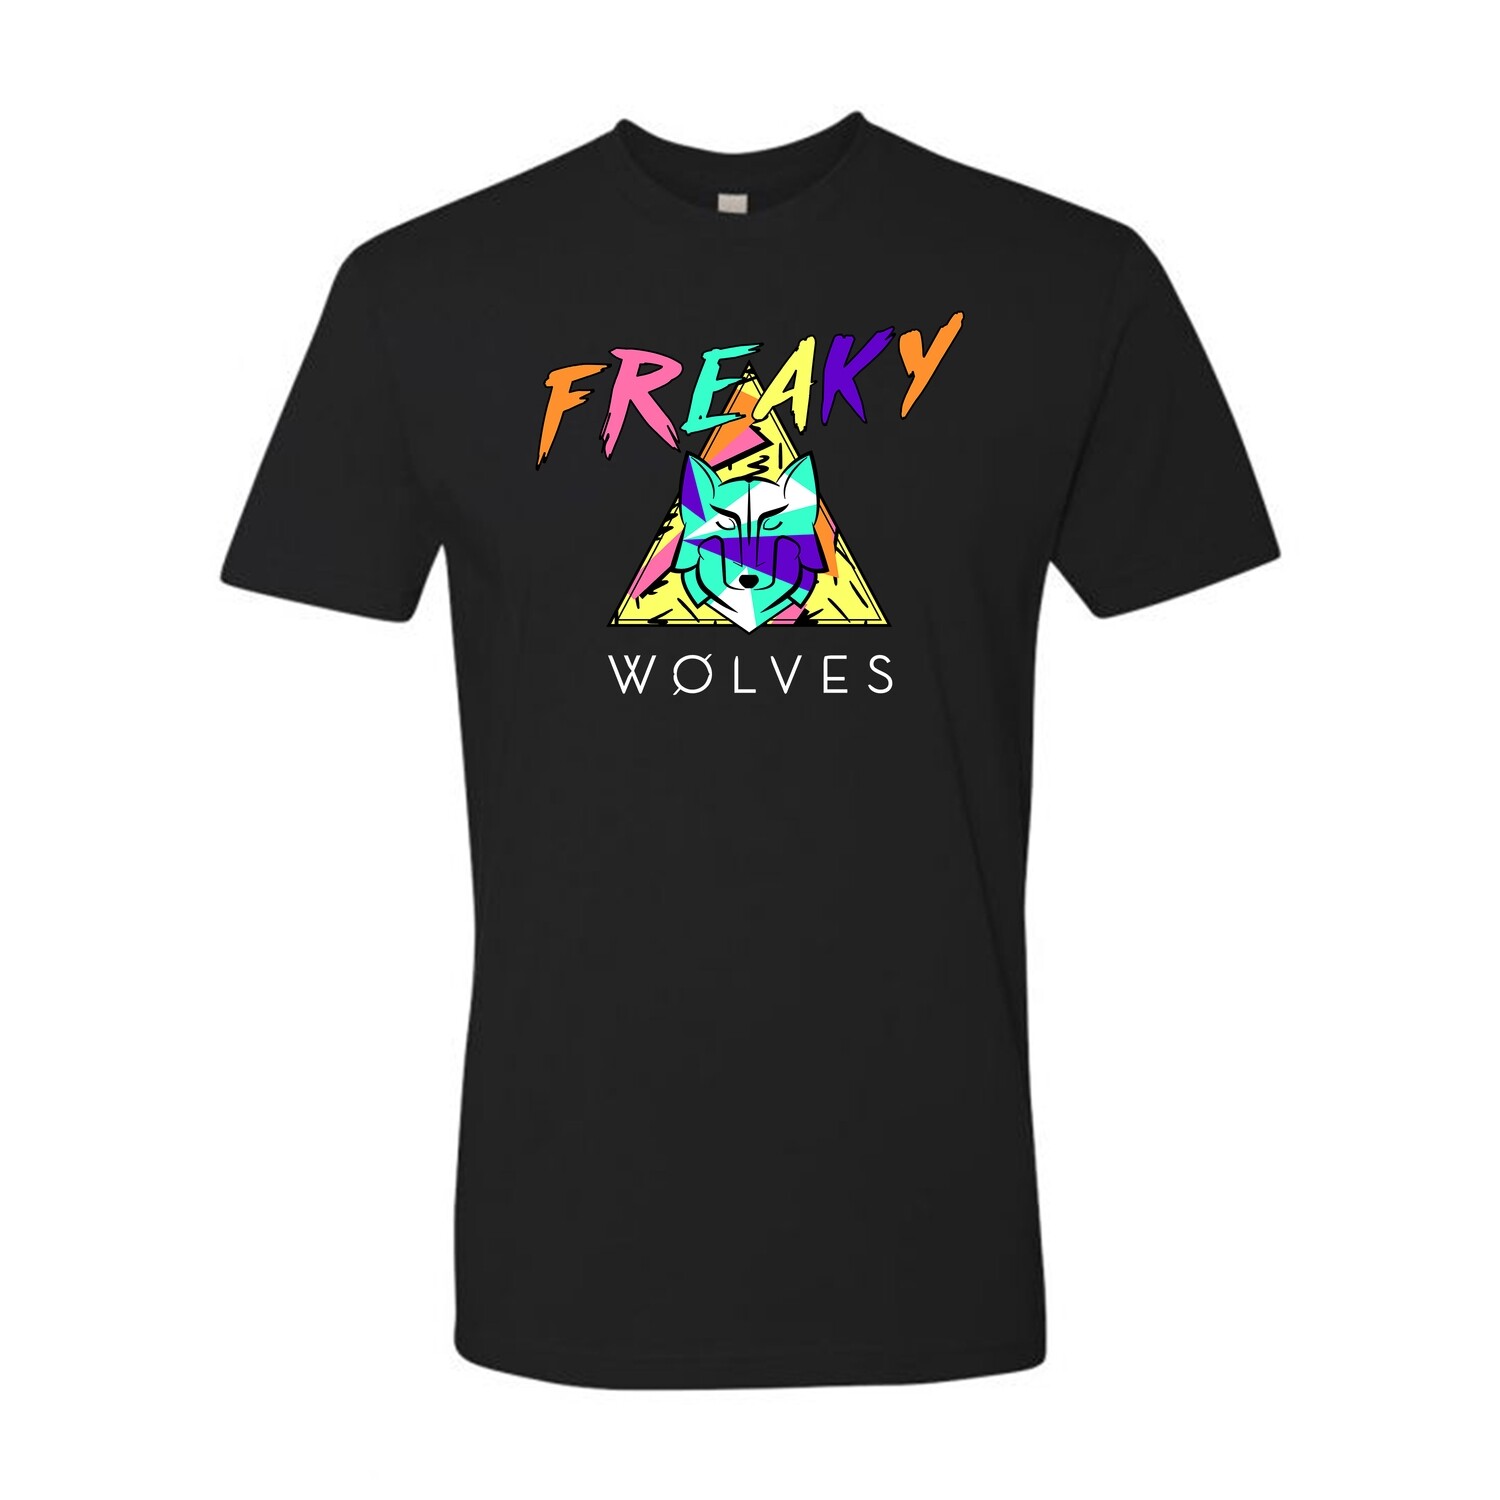 Wolves Freaky T-Shirt